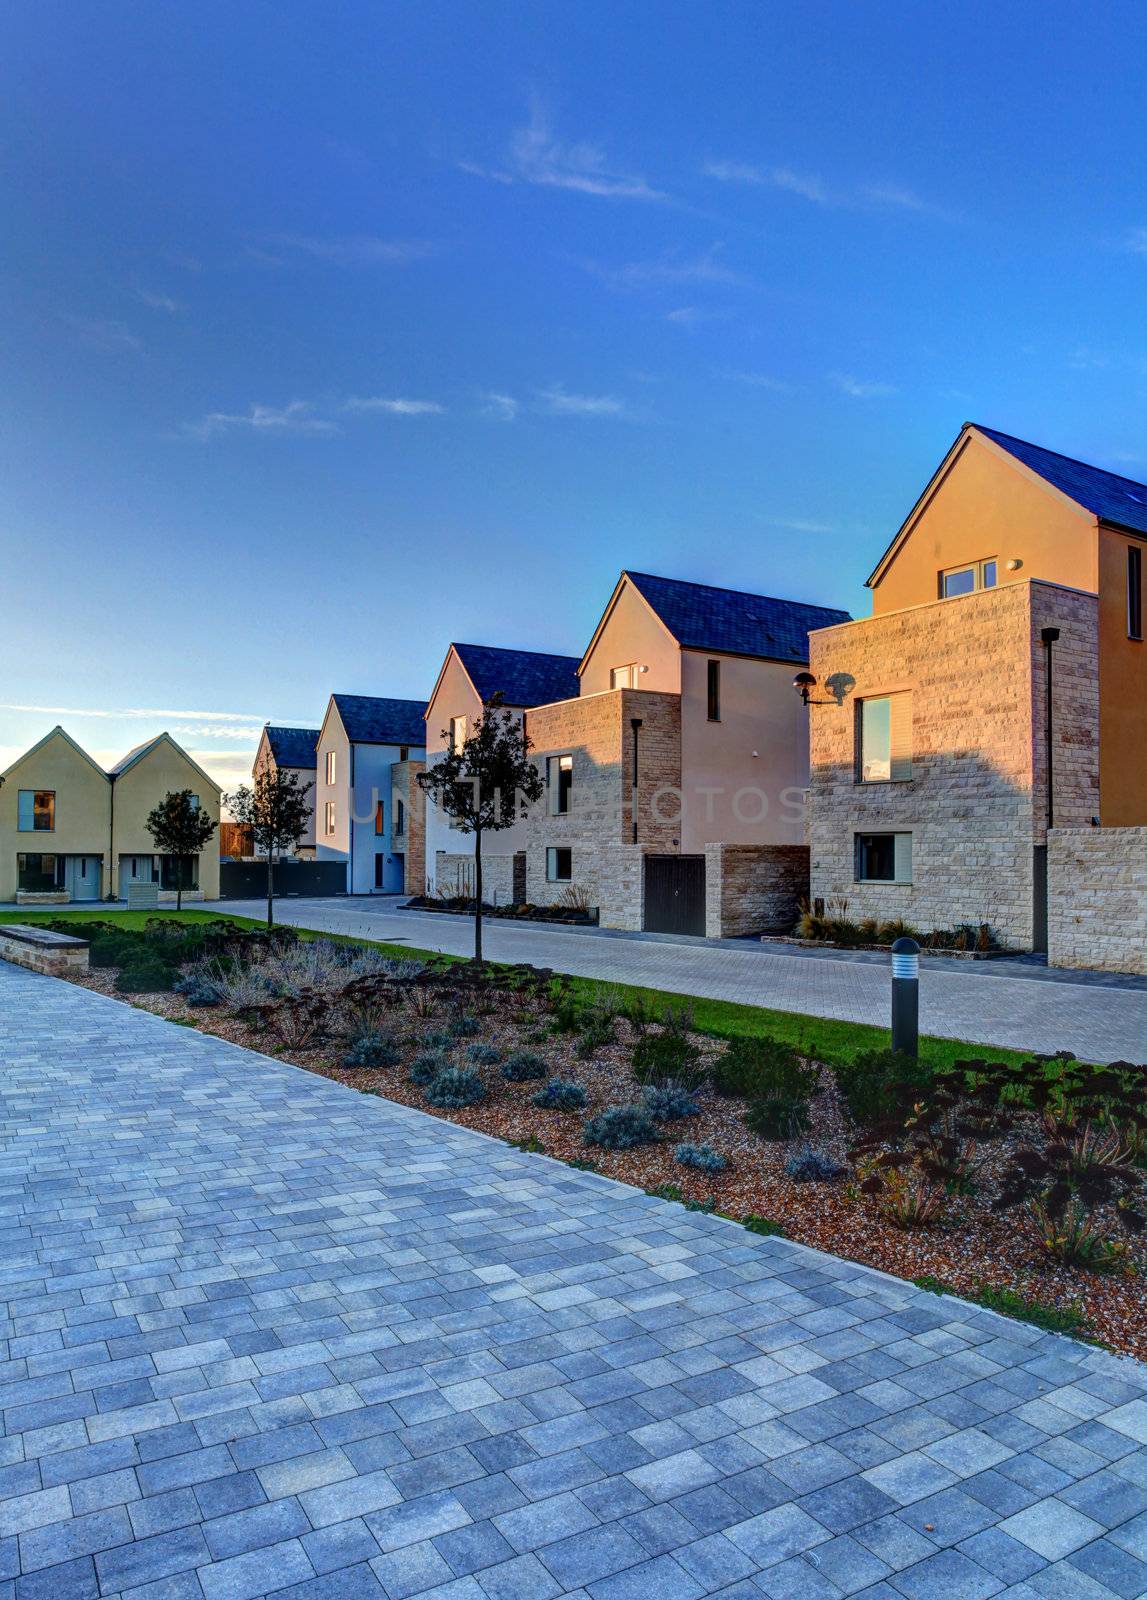 Sustainable housing on Portland in Dorset England